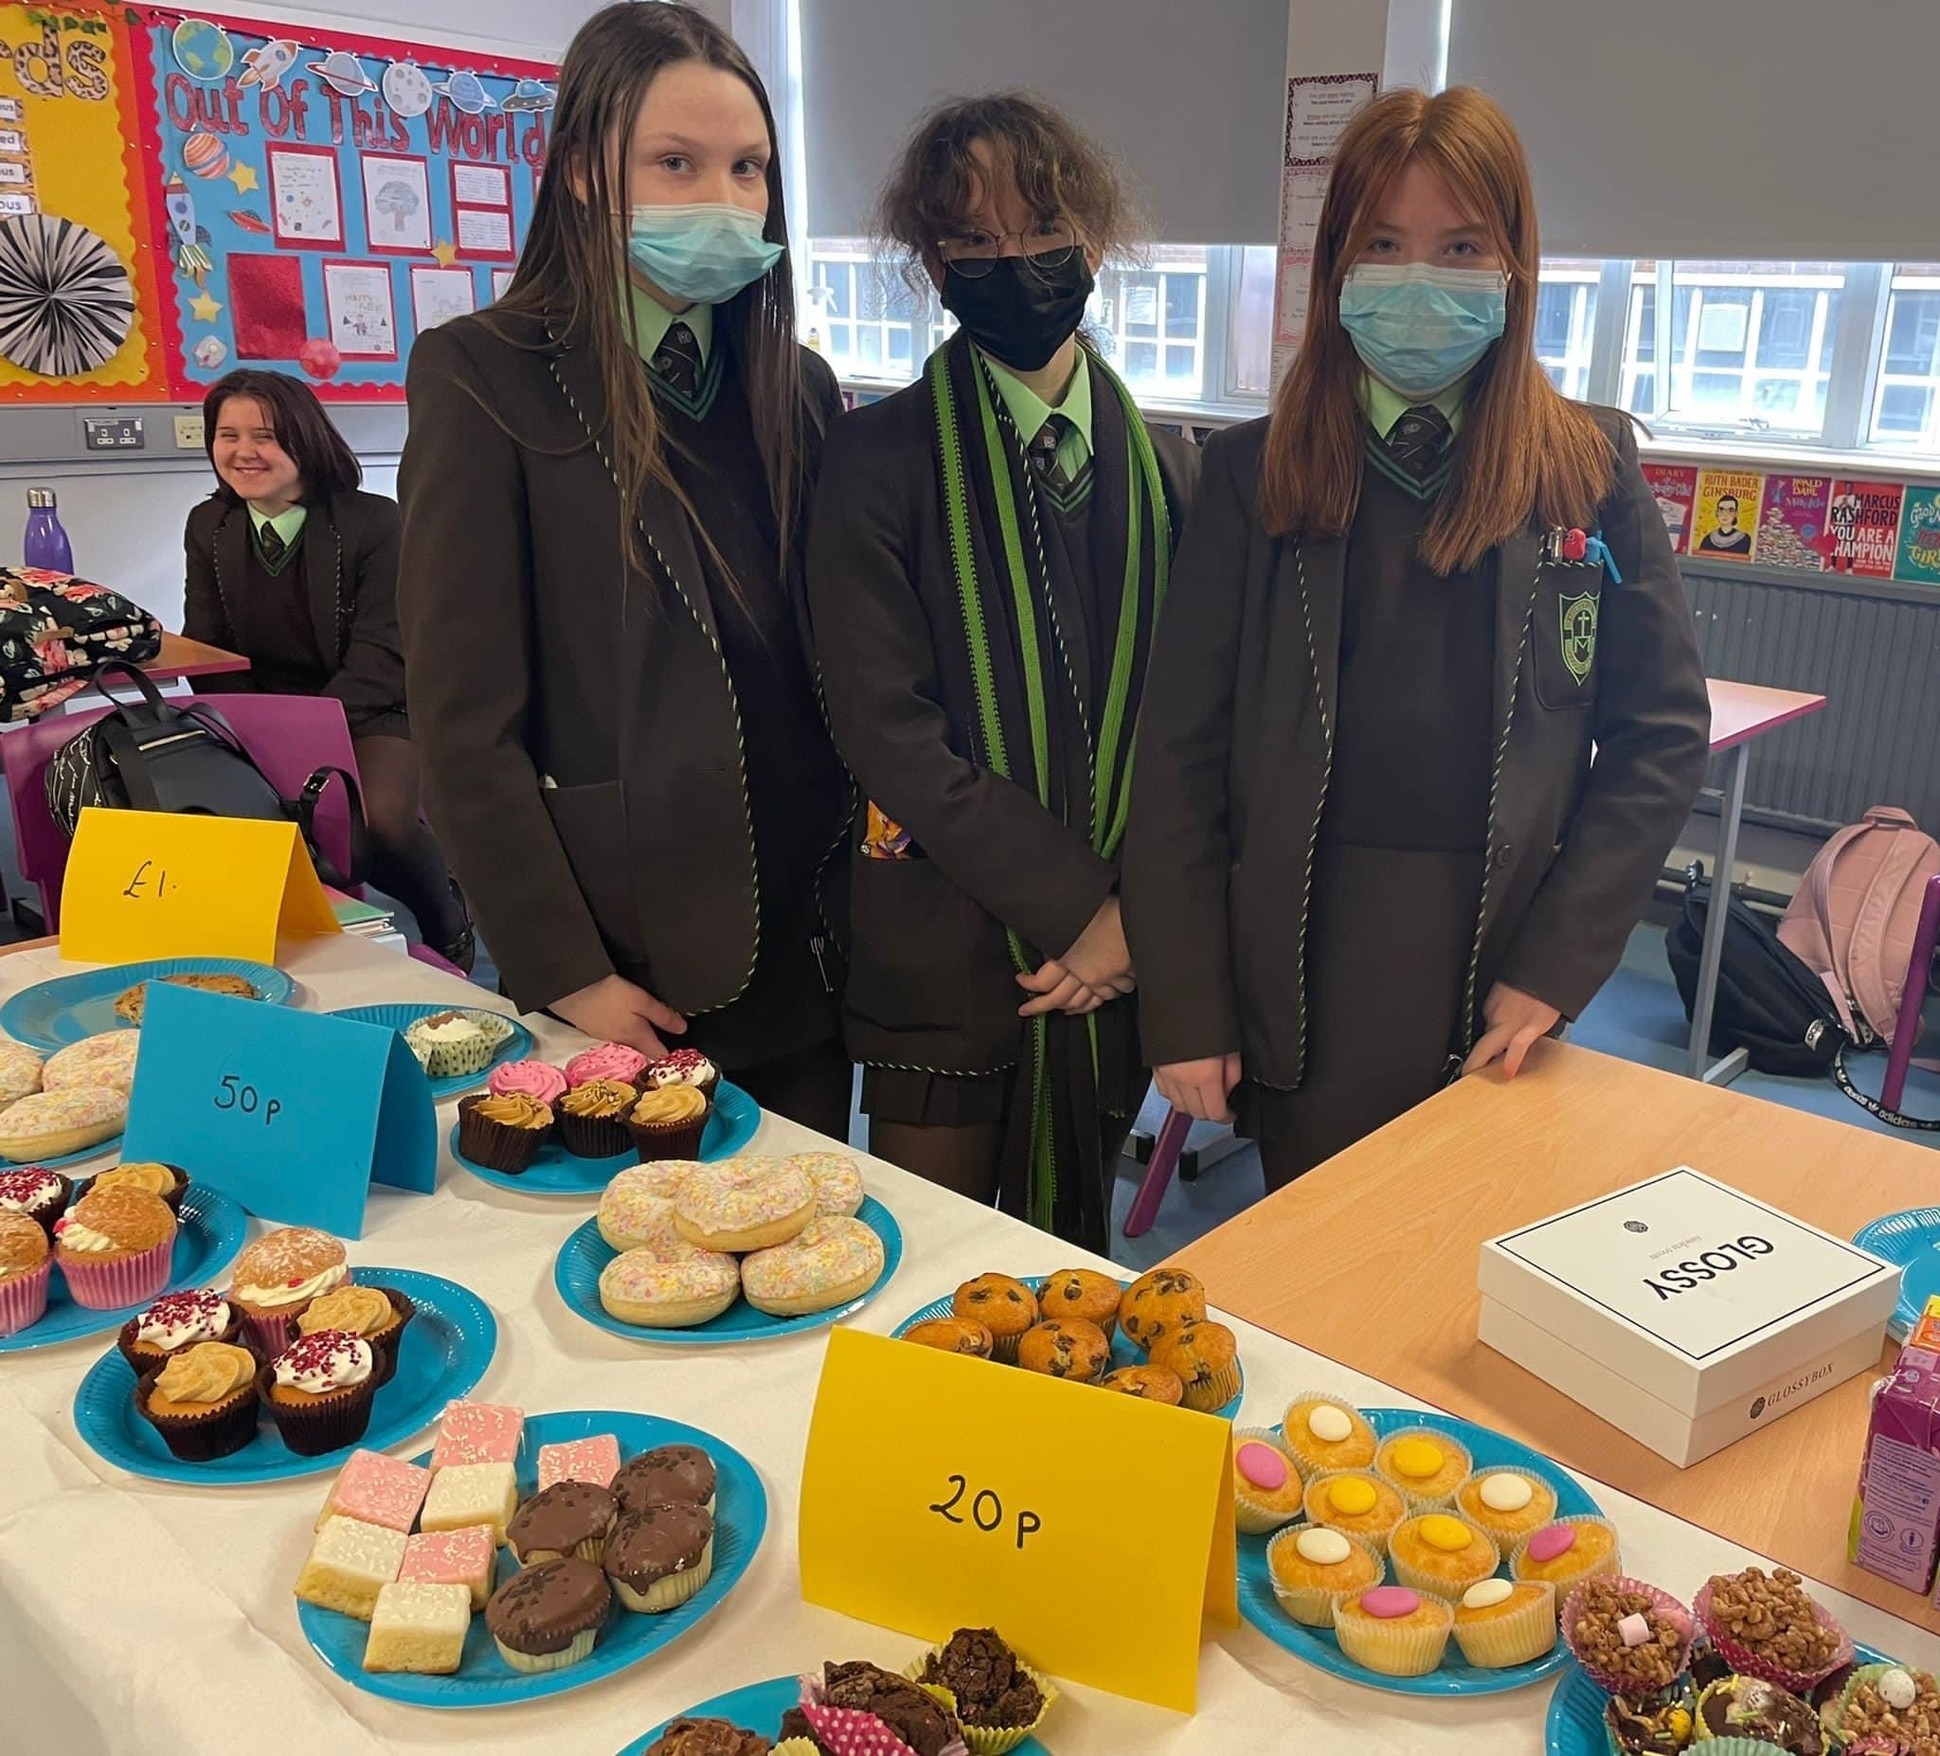 UKRAINE: Year 9 pupils raised £156.30 for the Ukraine appeal by hosting a bun sale.
The St. Louise’s community also raised £2773 through Go Fund Me for Ukraine.